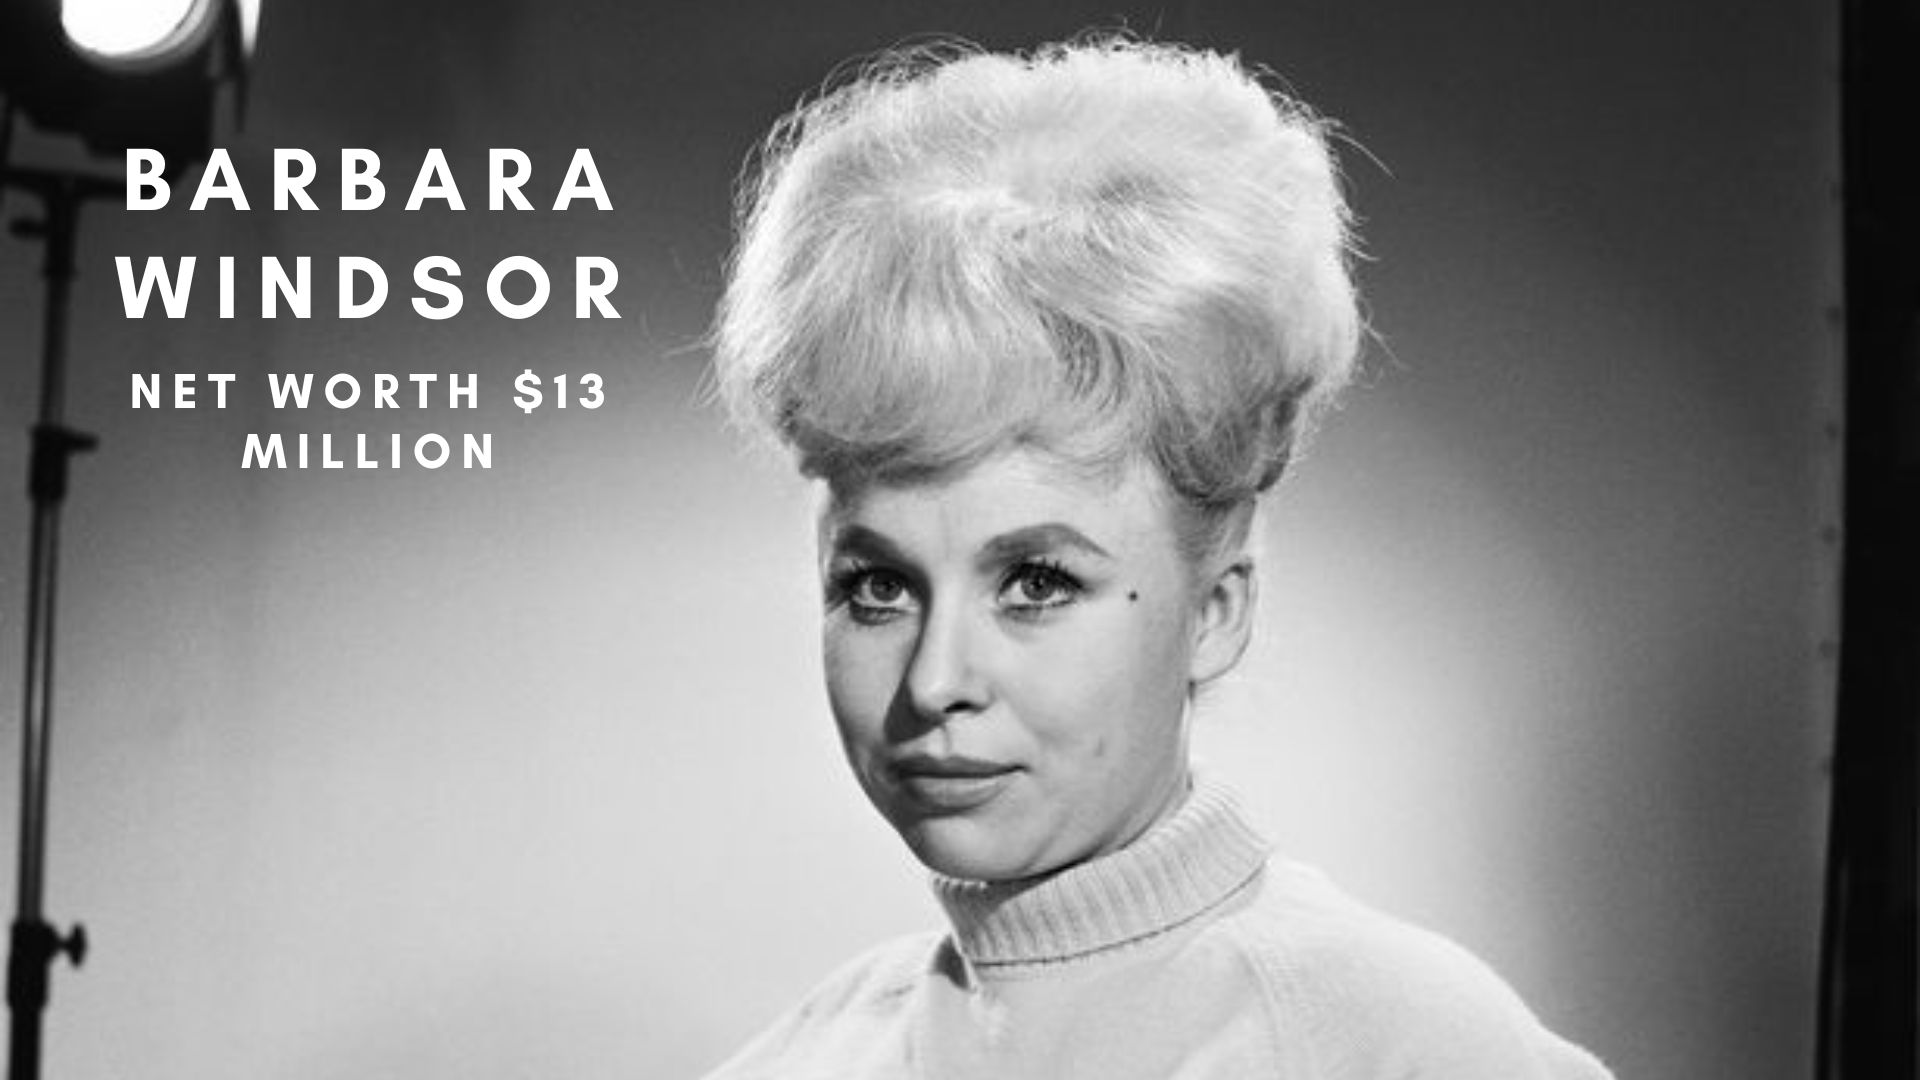 The net worth of Barbara Windsor is $13 million. (Credits: @CarryOnJohn Twitter)